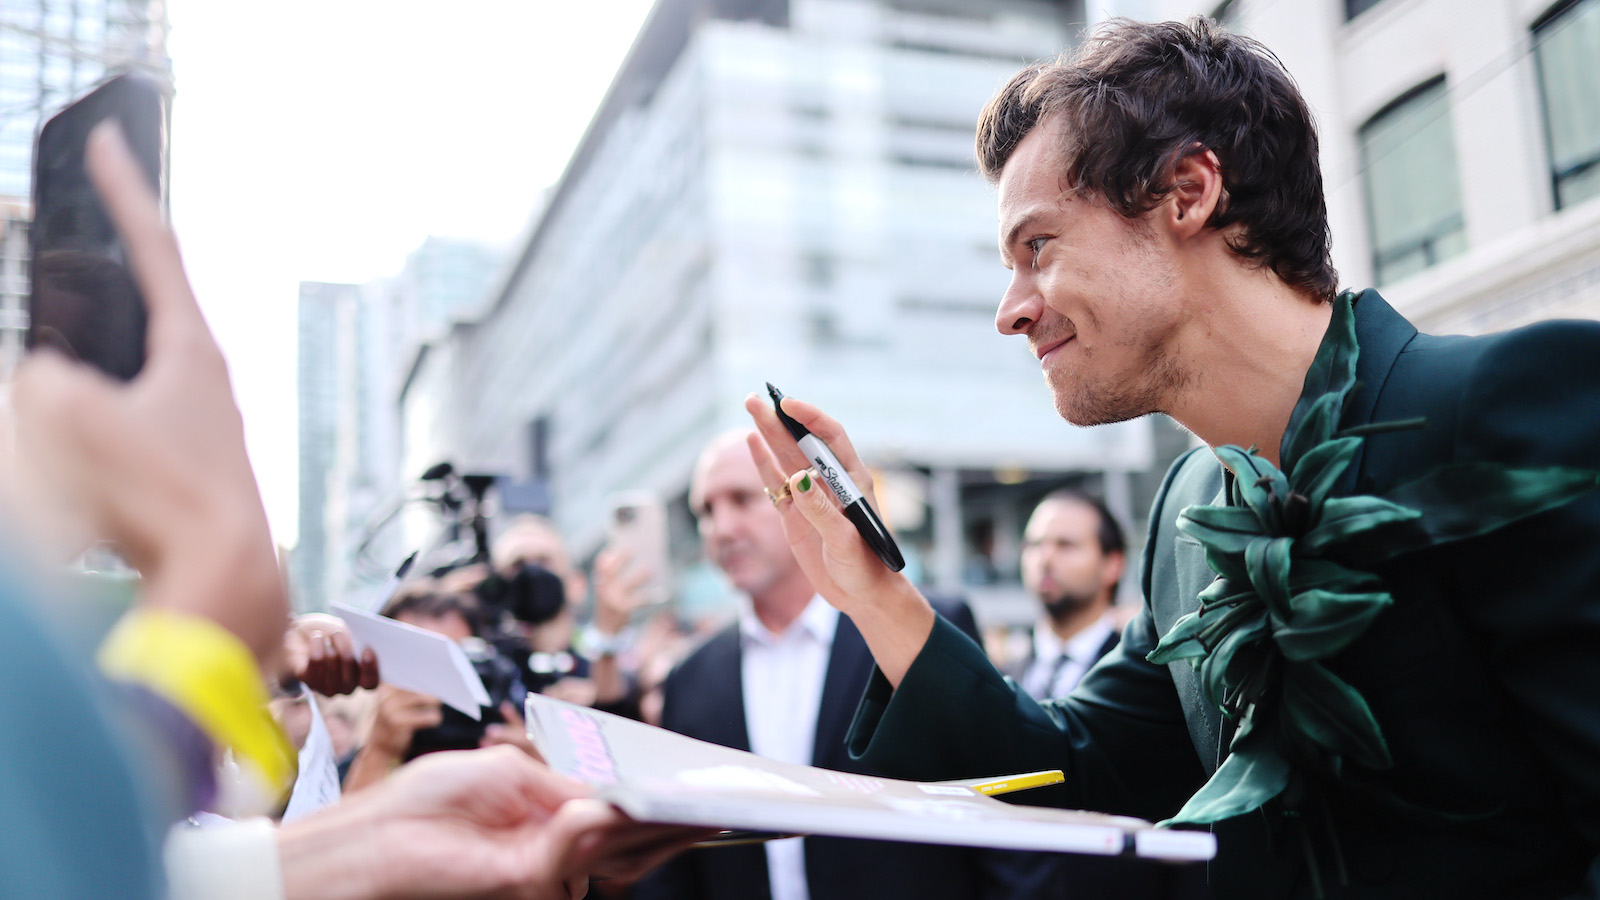 Harry Styles at the 'My Policeman' premiere in Toronto